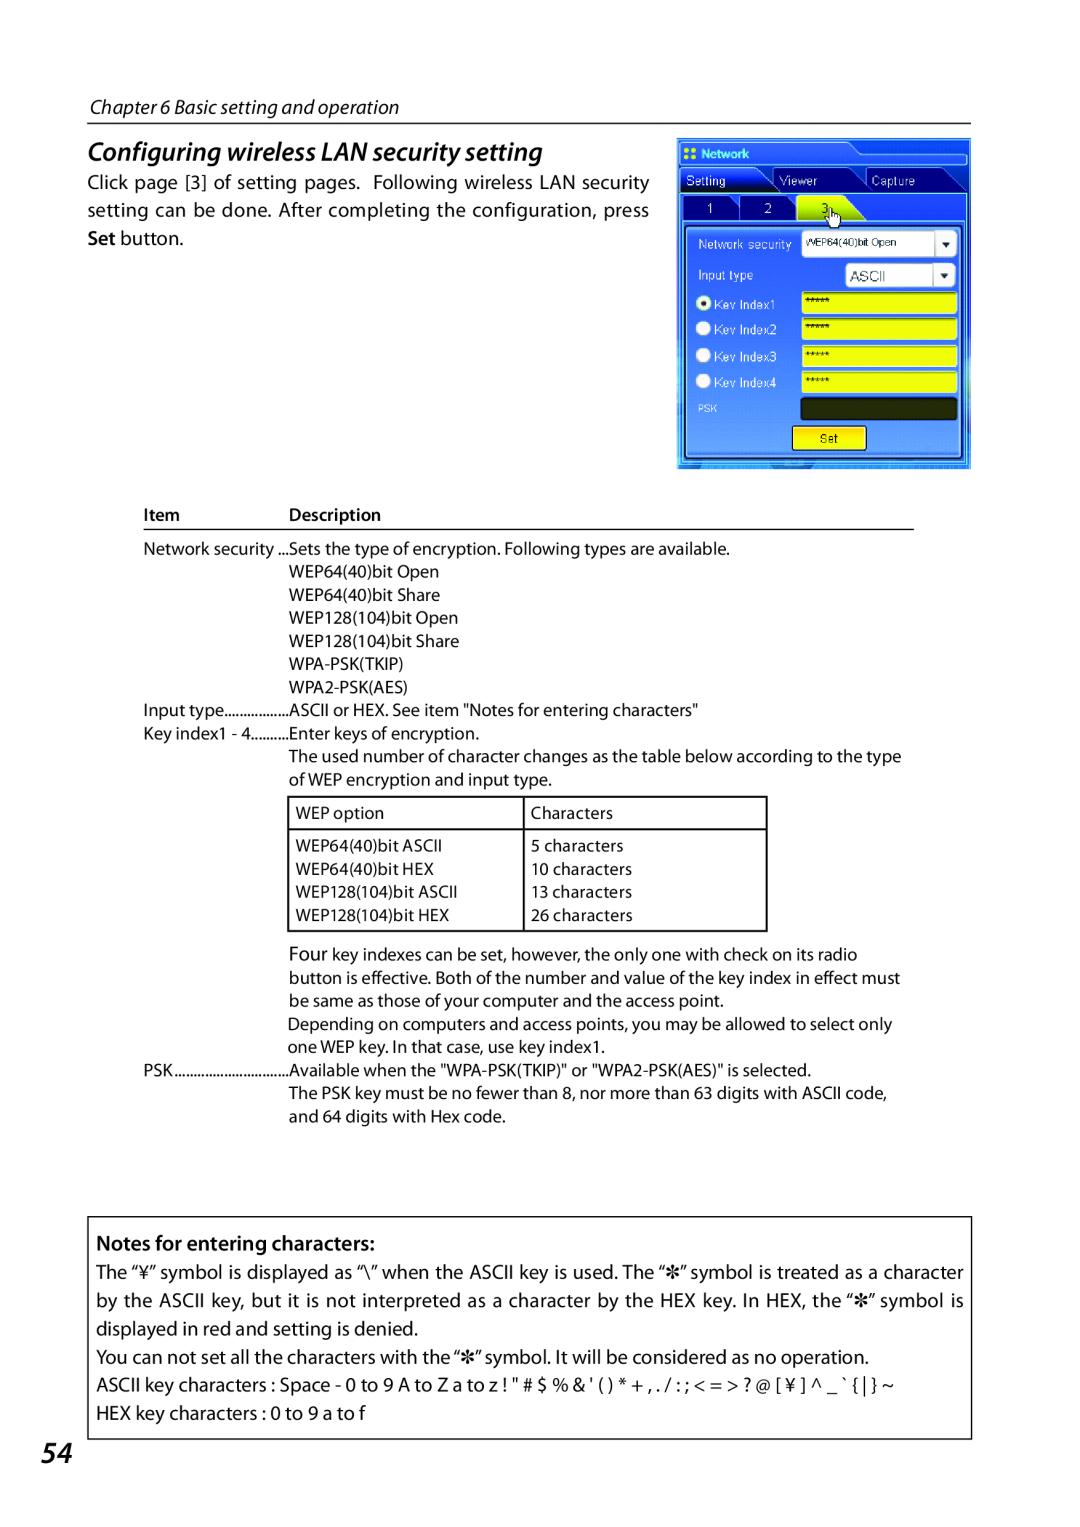 Sanyo PLCXL51 Configuring wireless LAN security setting, Notes for entering characters, Basic setting and operation 